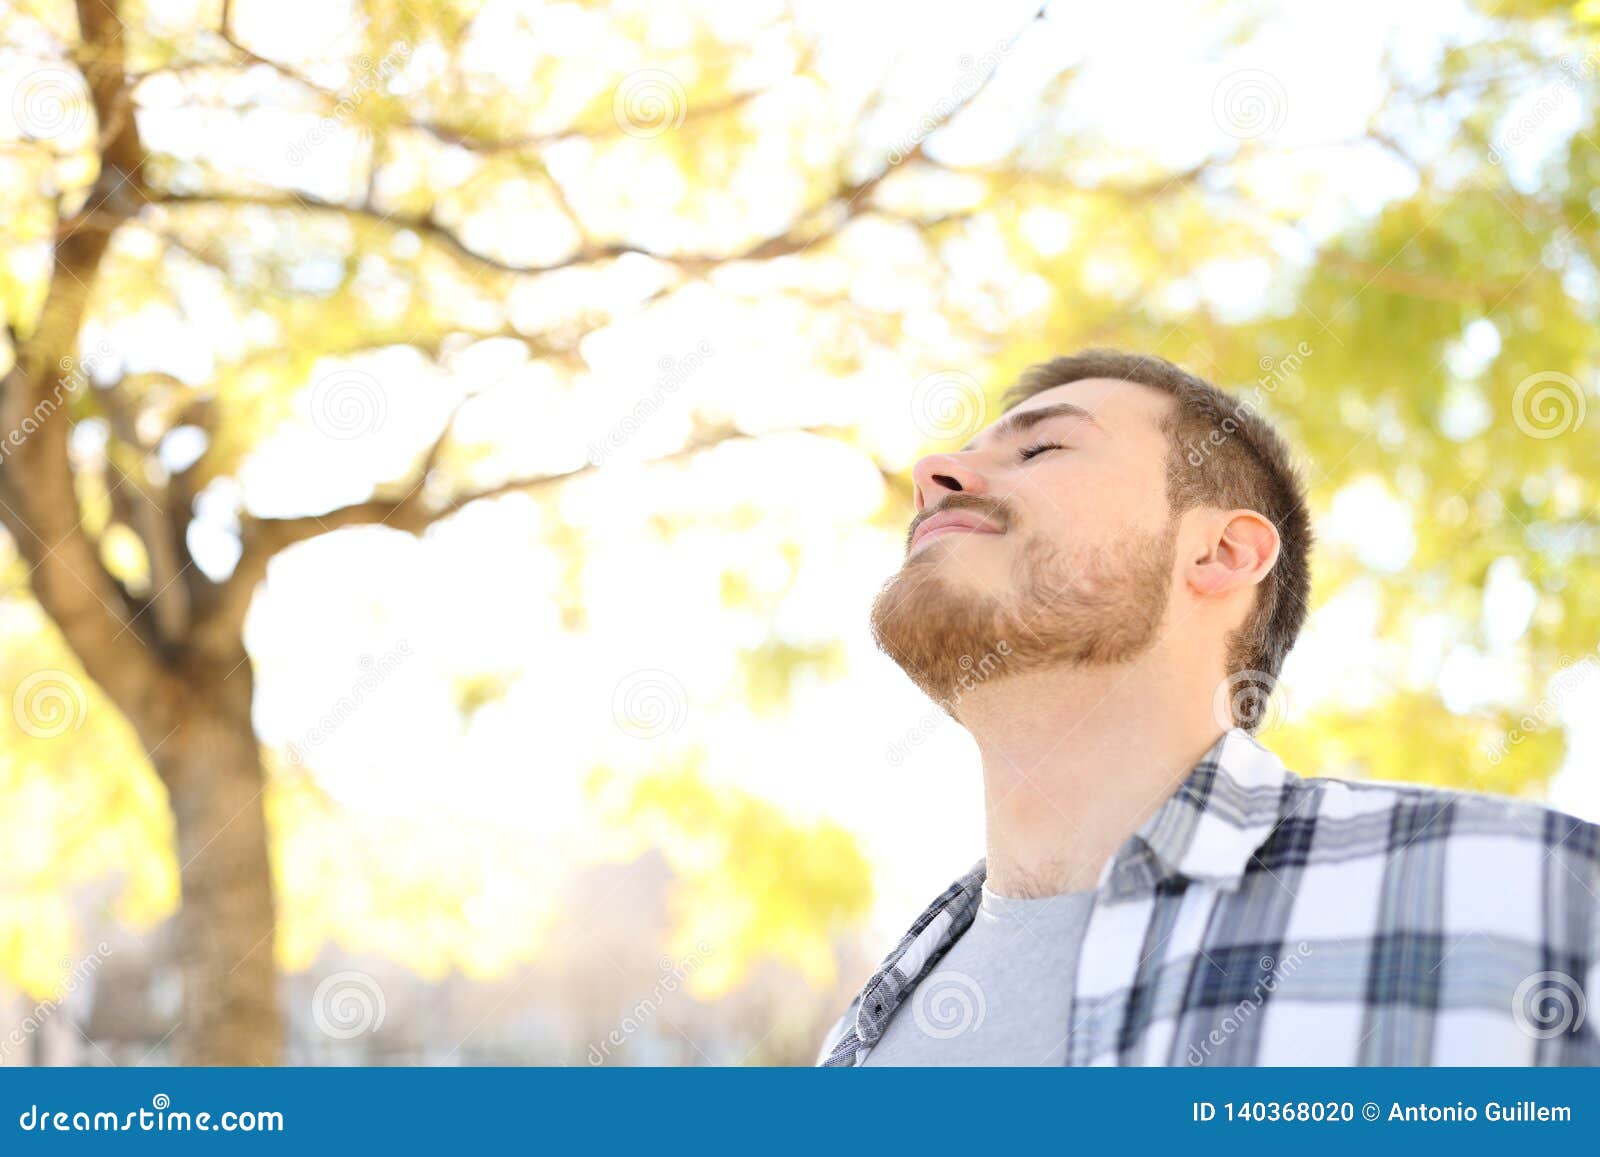 relaxed man is breathing fresh air in a park